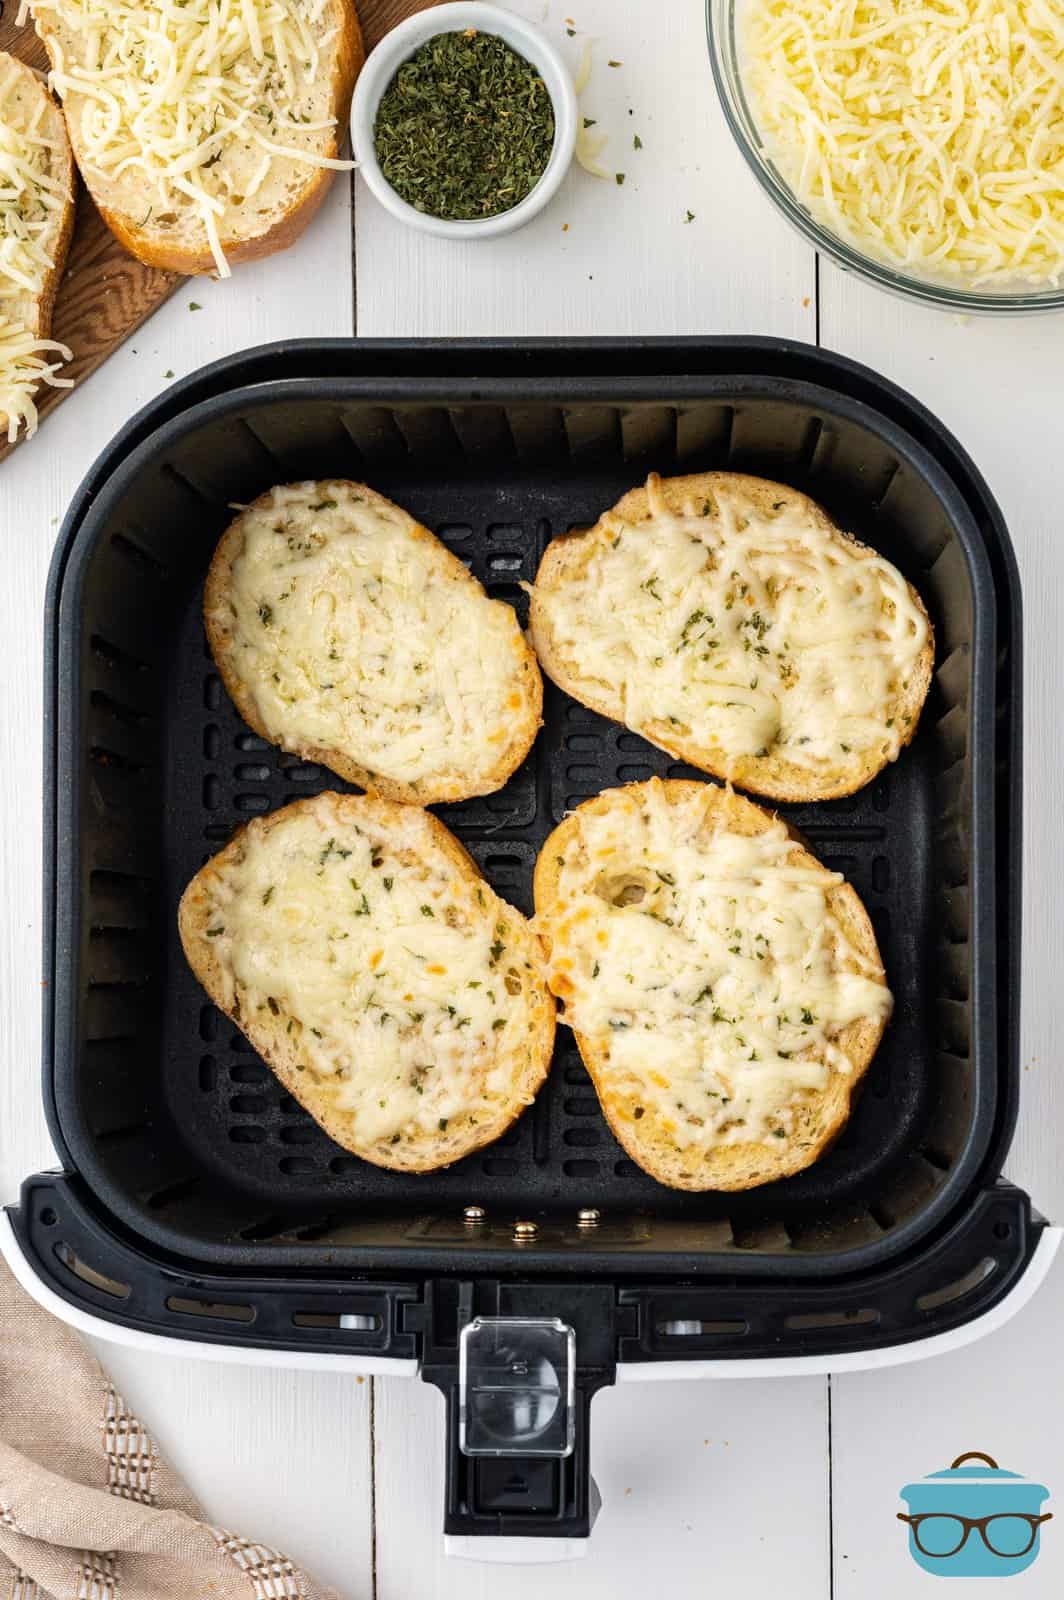 An Air Fryer basket with 4 slices of garlic bread.